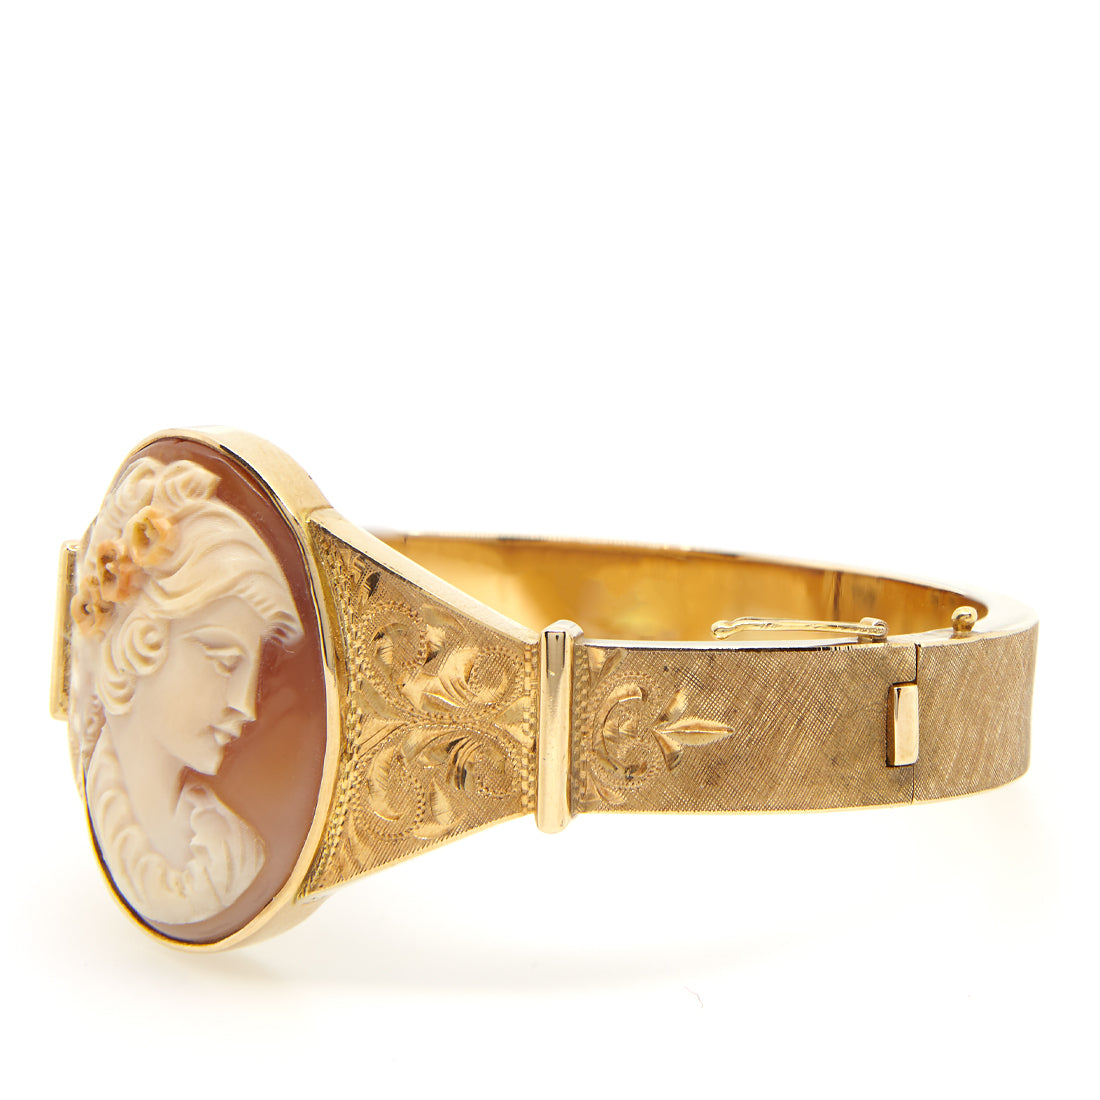 Antique yellow gold bracelet with shell cameo